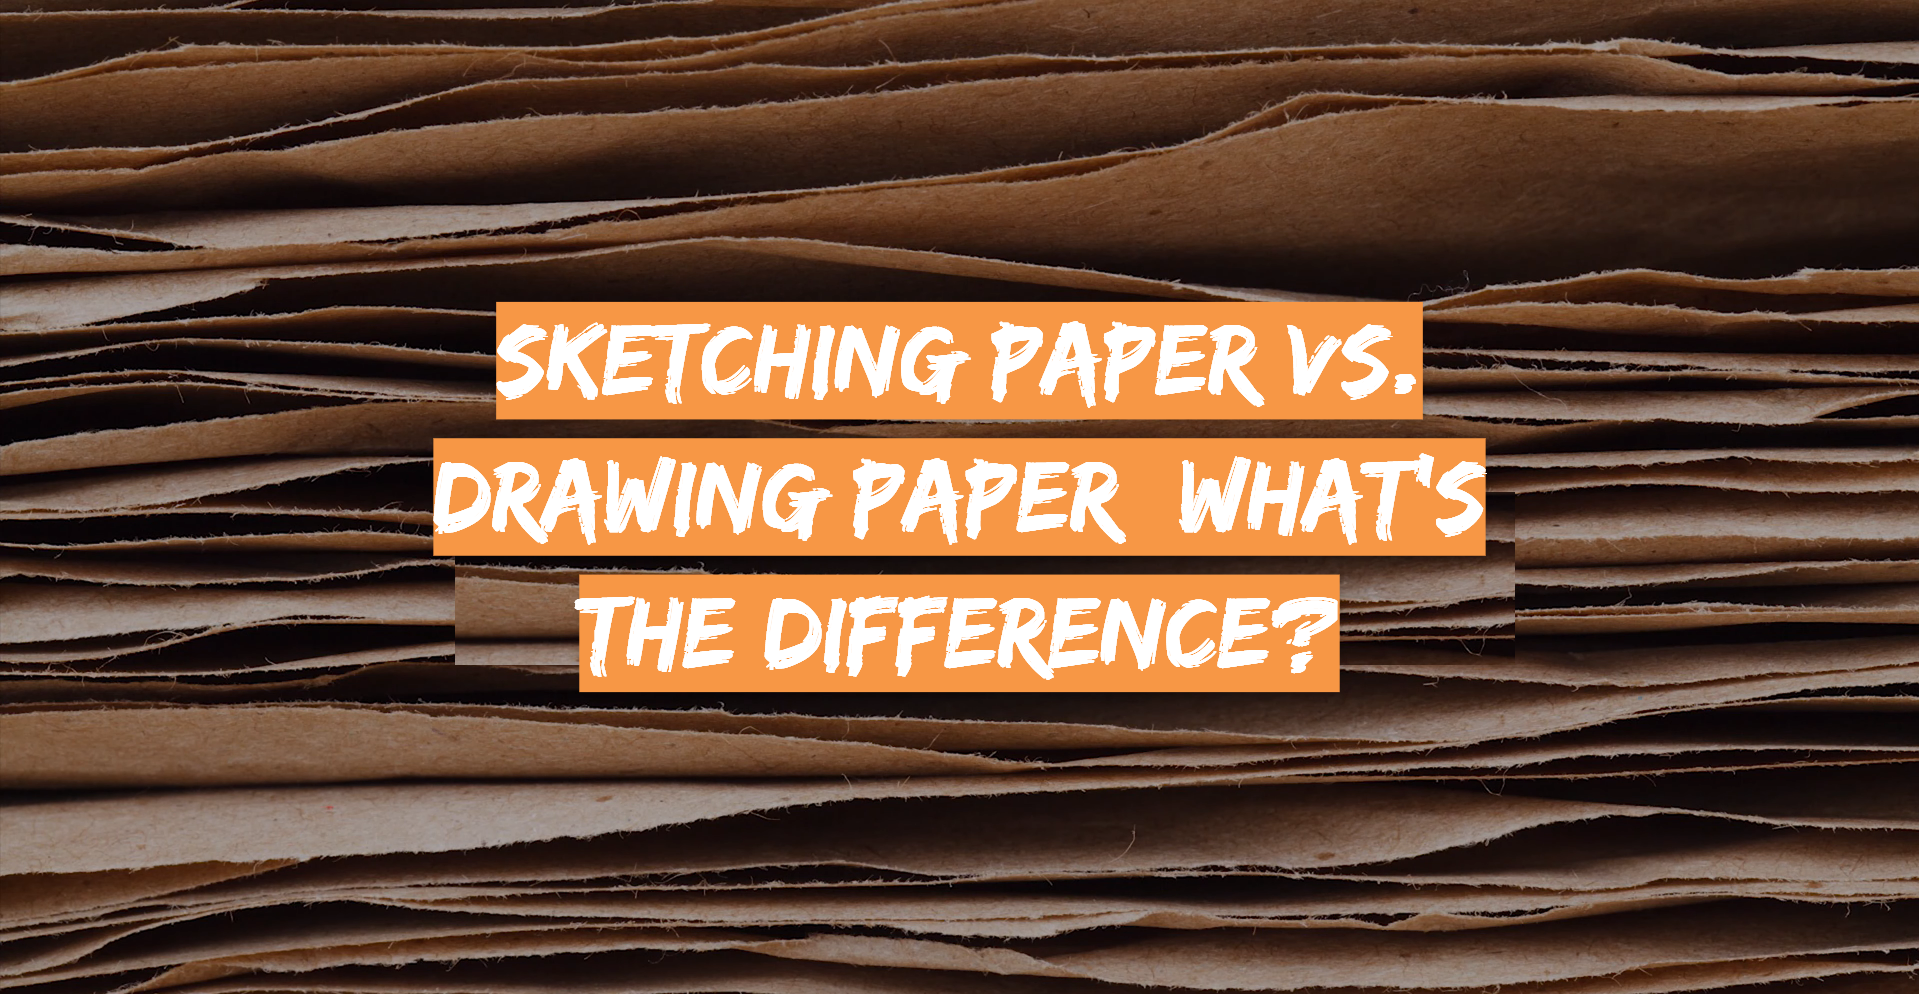 What is the difference between sketch & drawing paper